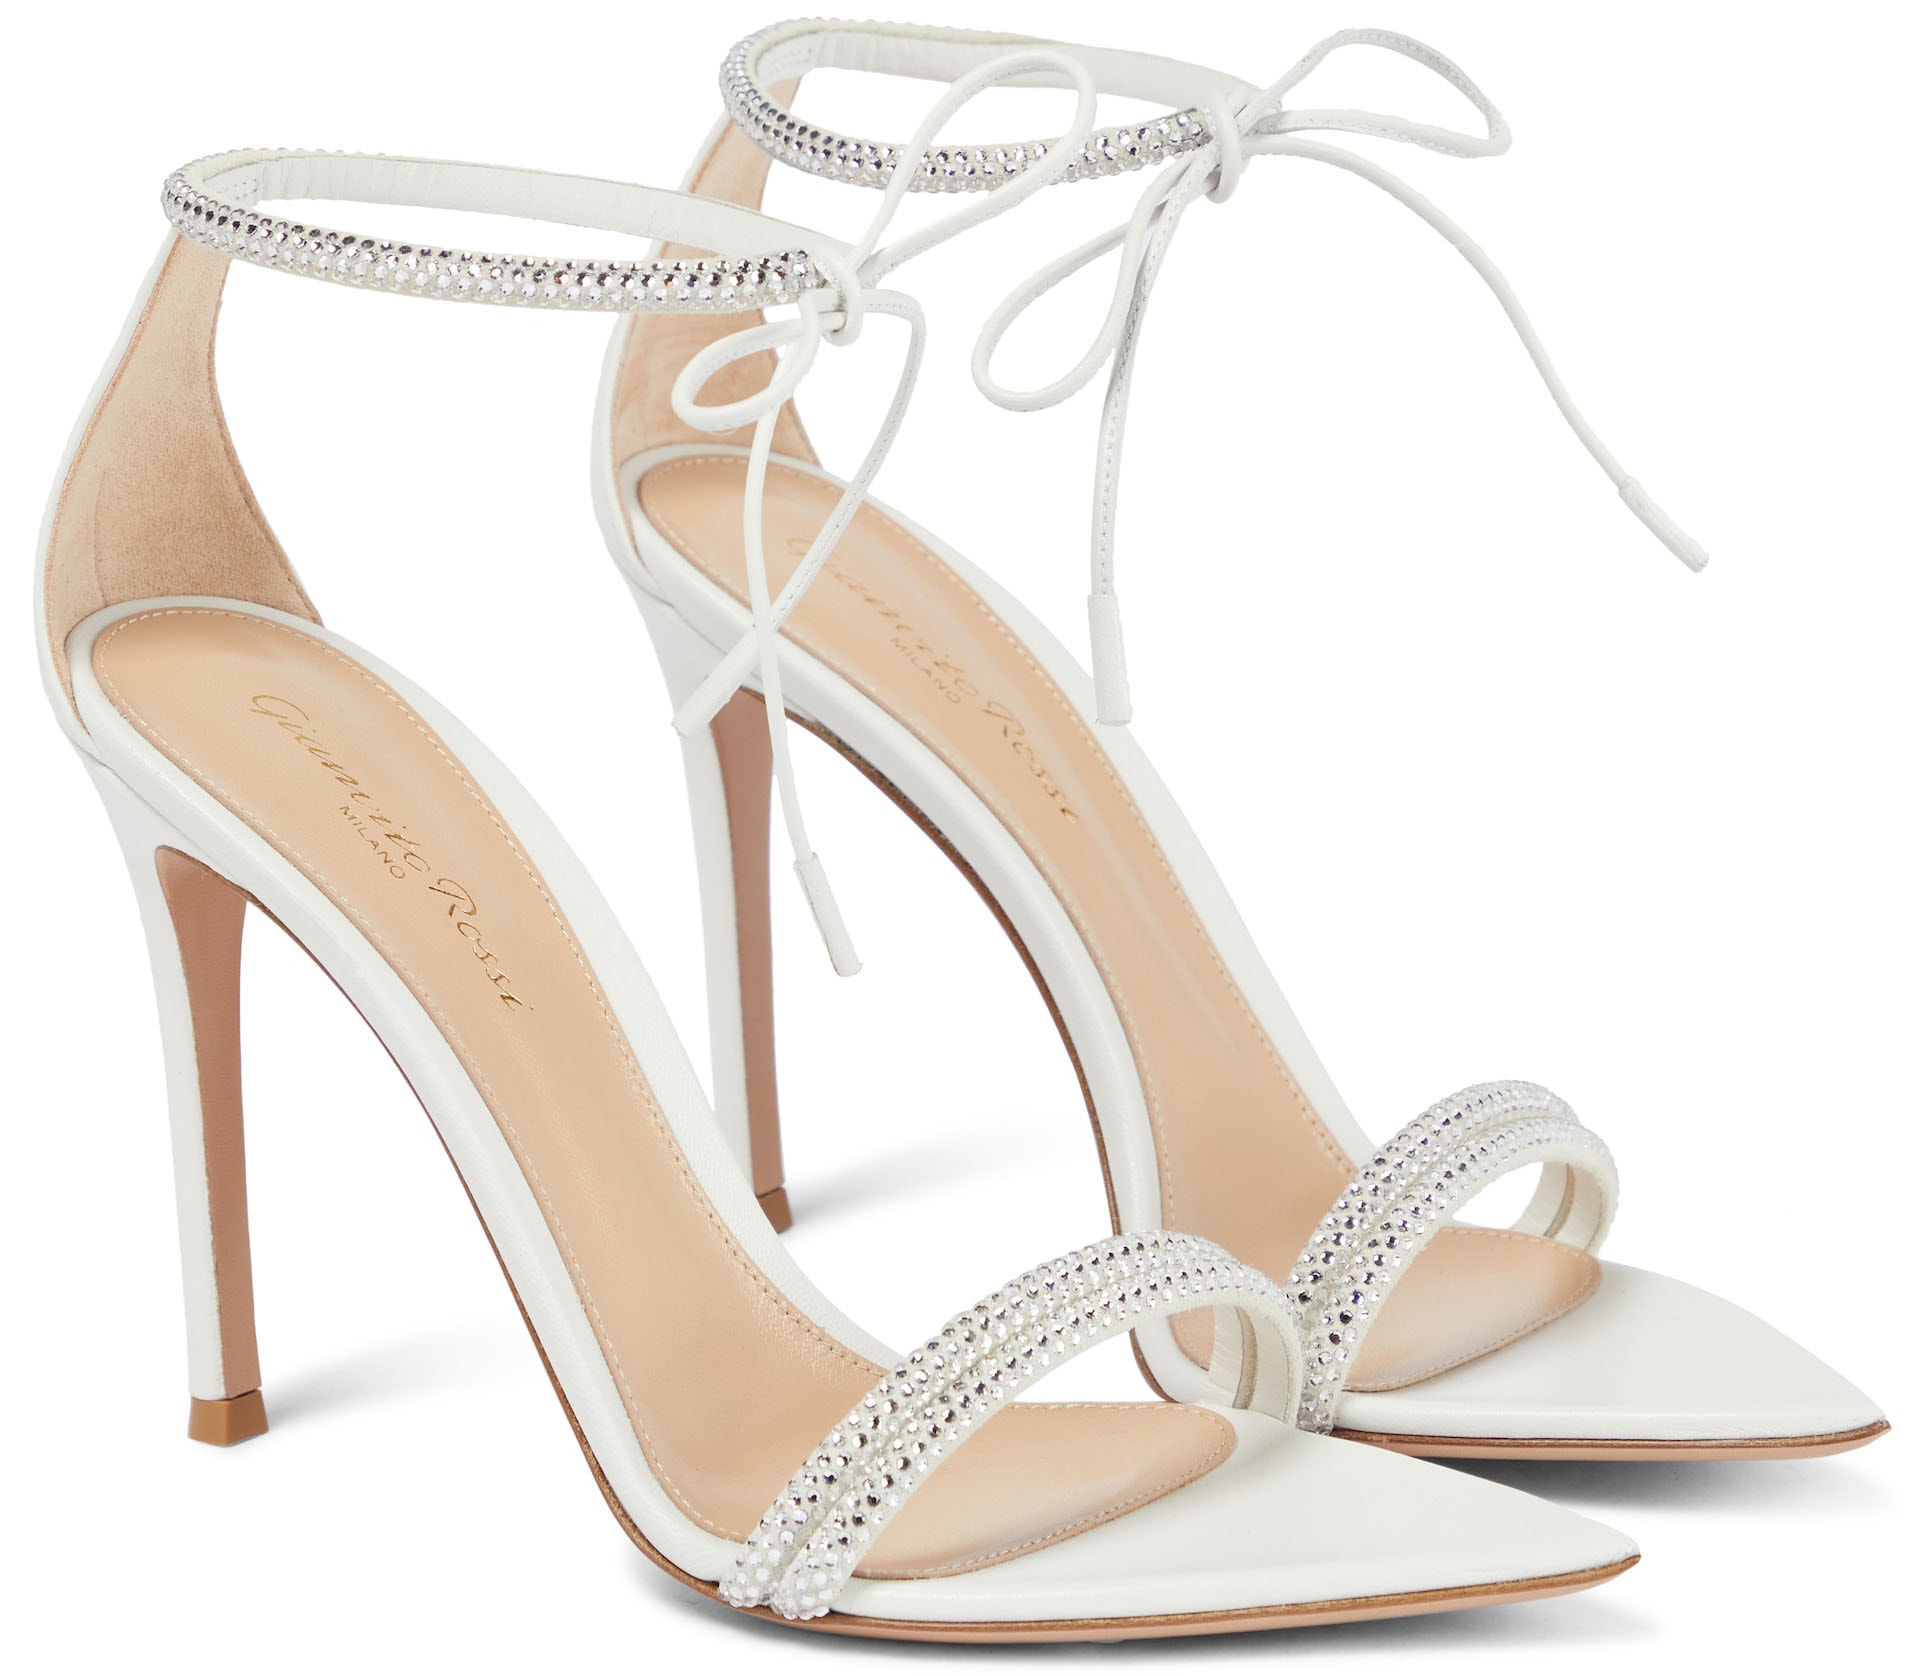 The Gianvito Rossi Montecarlo sandals are studded with crystals, backed with suede, and set atop 4-inch heels